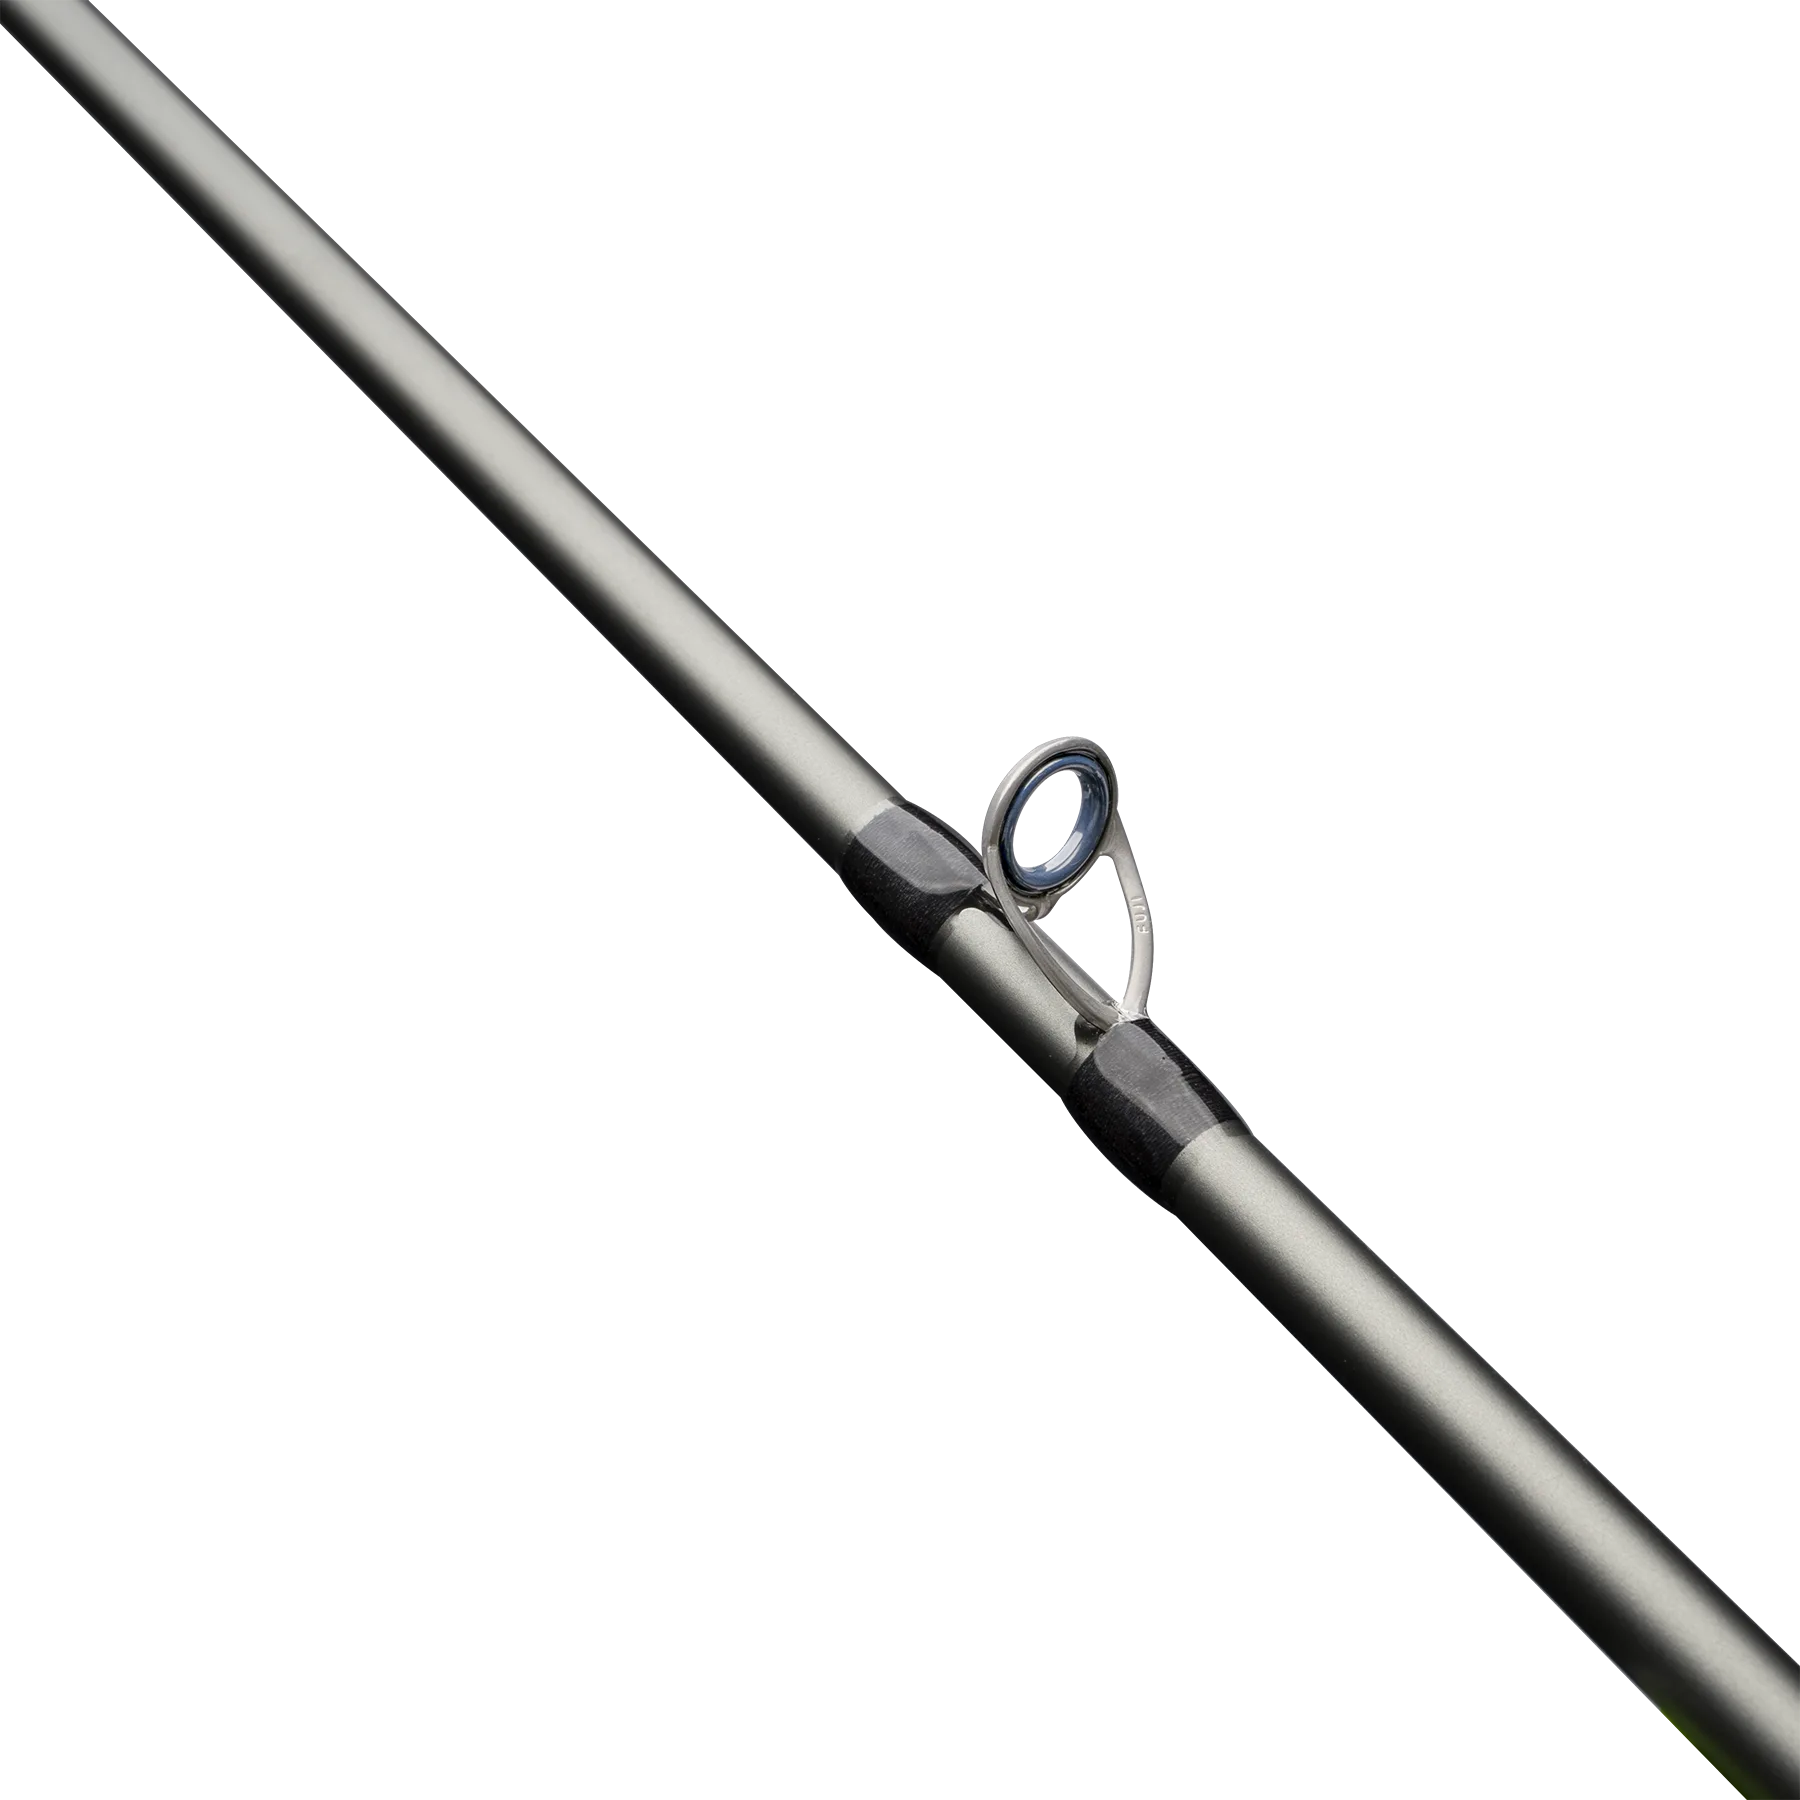 Ark Genesis Series 2-Piece Travel Rod Review - Wired2Fish